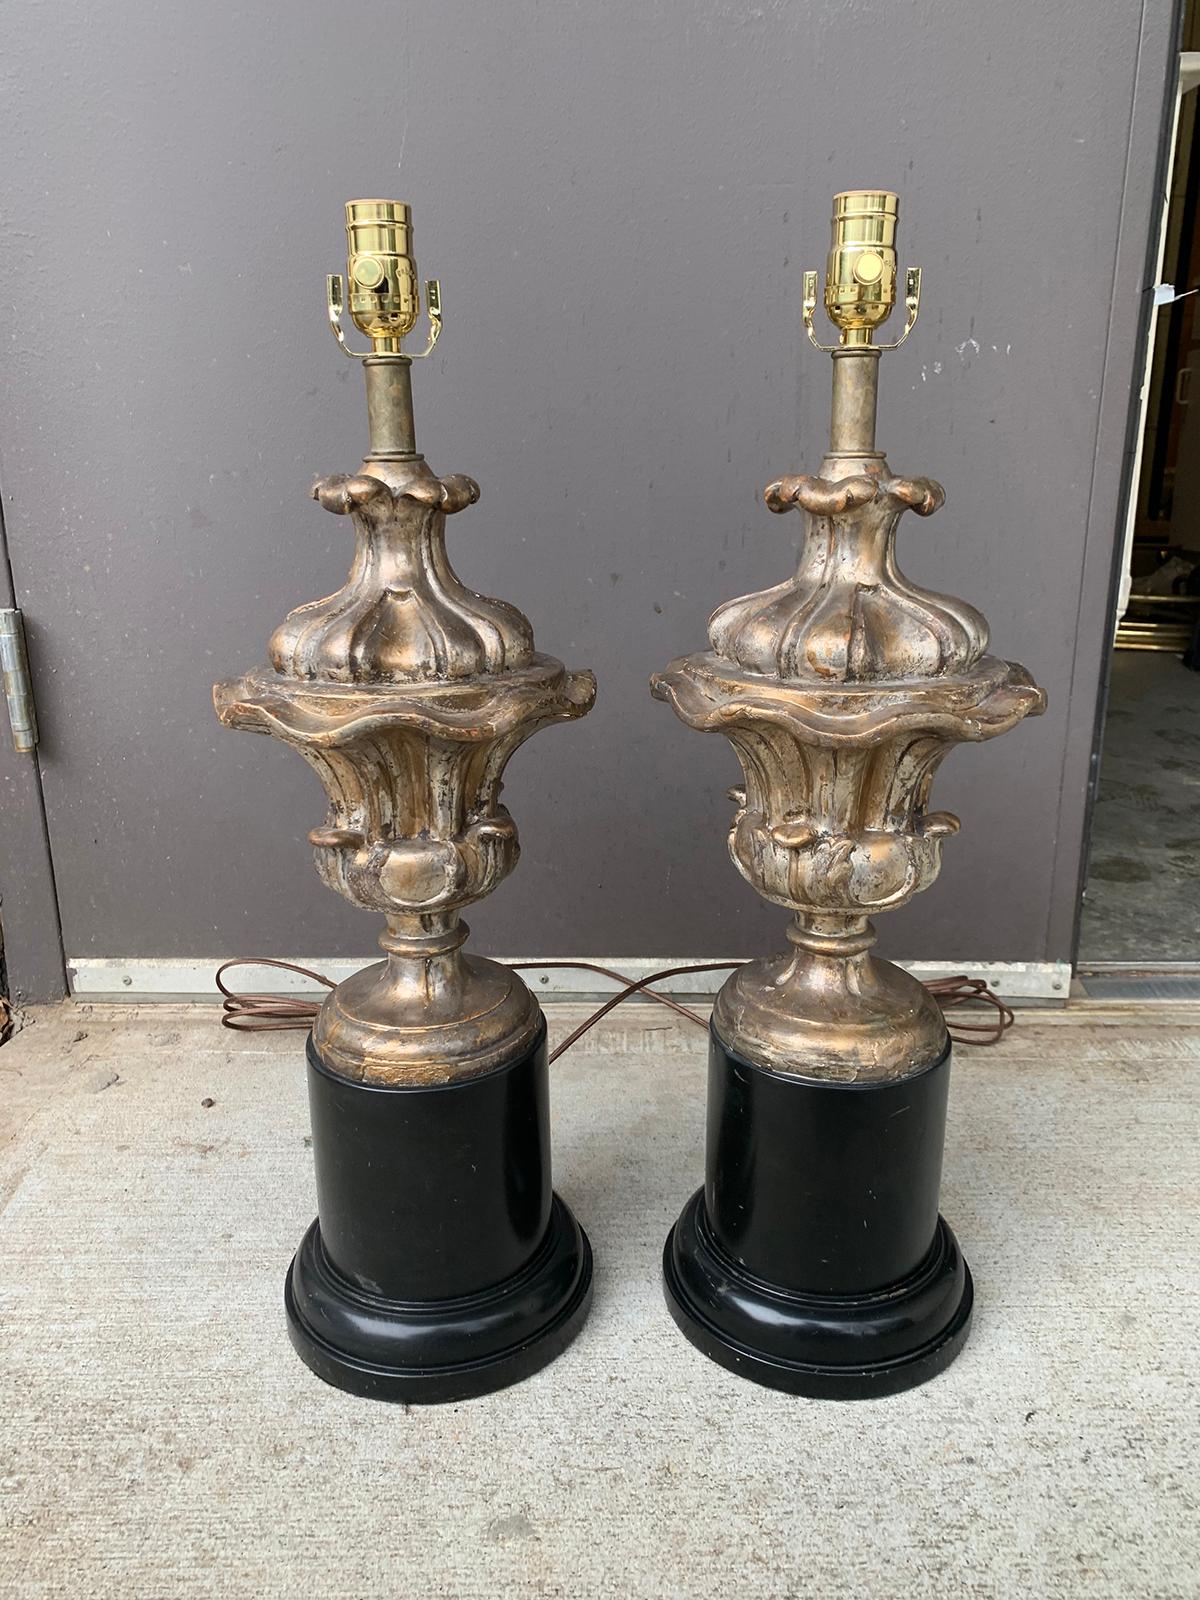 Pair of 18th century Italian silver gilt urns as lamps on old black bases
Brand new wiring.